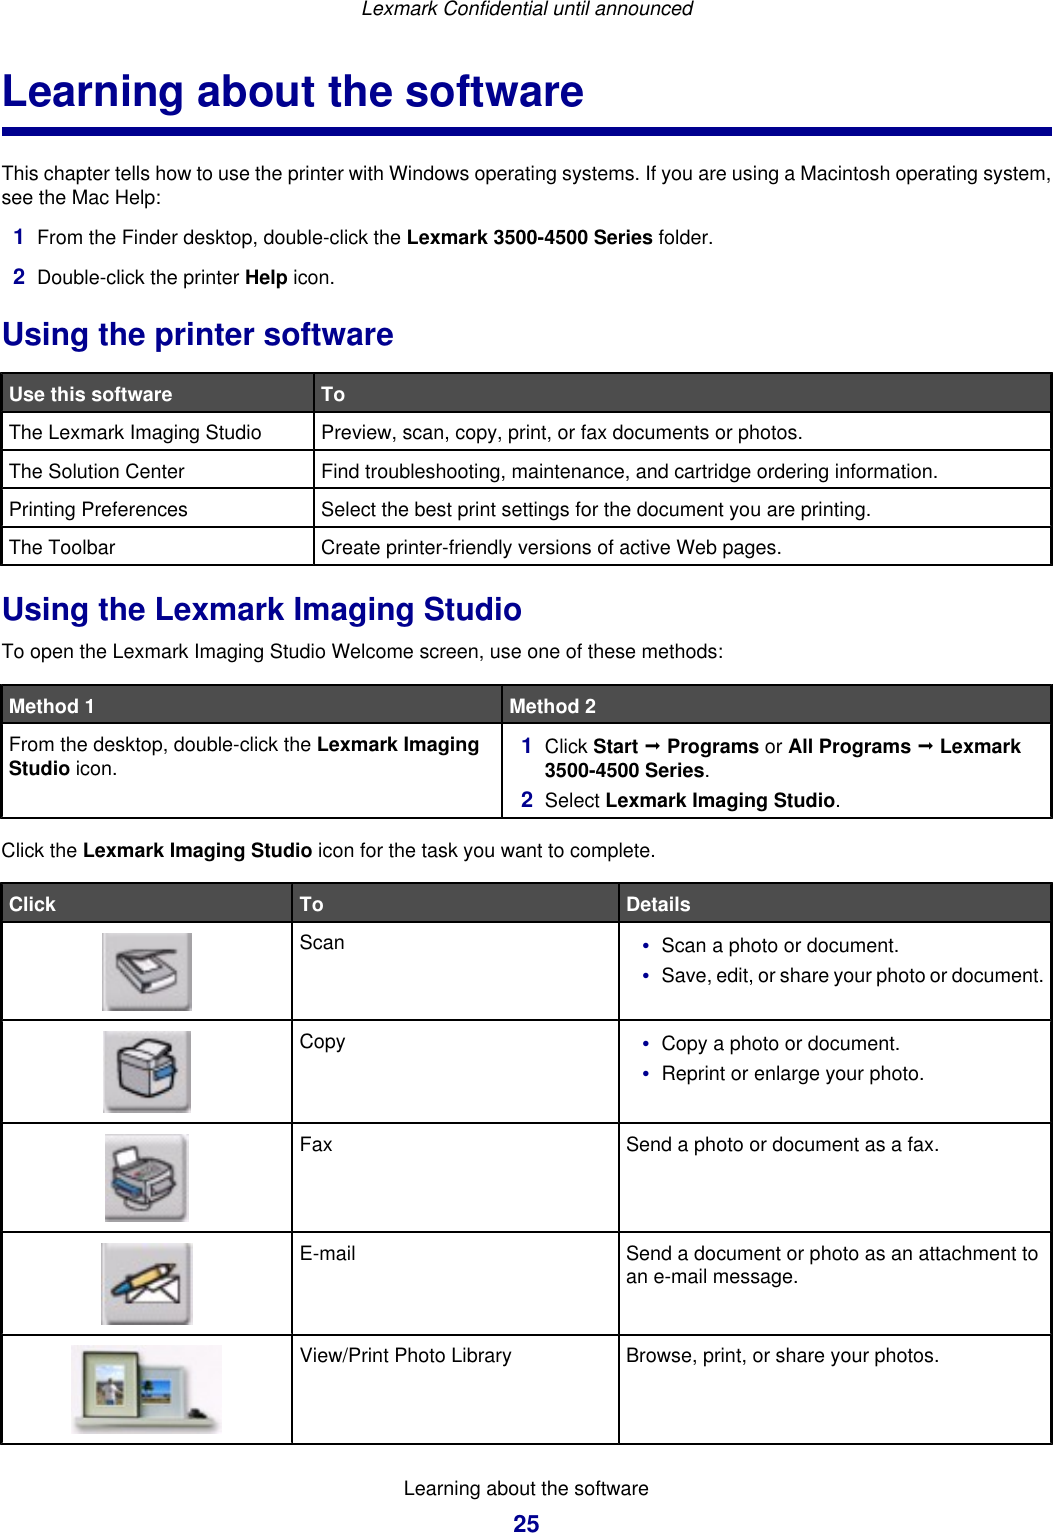 Learning about the softwareThis chapter tells how to use the printer with Windows operating systems. If you are using a Macintosh operating system,see the Mac Help:1From the Finder desktop, double-click the Lexmark 3500-4500 Series folder.2Double-click the printer Help icon.Using the printer softwareUse this software ToThe Lexmark Imaging Studio Preview, scan, copy, print, or fax documents or photos.The Solution Center Find troubleshooting, maintenance, and cartridge ordering information.Printing Preferences Select the best print settings for the document you are printing.The Toolbar Create printer-friendly versions of active Web pages.Using the Lexmark Imaging StudioTo open the Lexmark Imaging Studio Welcome screen, use one of these methods:Method 1 Method 2From the desktop, double-click the Lexmark ImagingStudio icon. 1Click Start ª Programs or All Programs ª Lexmark3500-4500 Series.2Select Lexmark Imaging Studio.Click the Lexmark Imaging Studio icon for the task you want to complete.Click To DetailsScan •Scan a photo or document.•Save, edit, or share your photo or document.Copy •Copy a photo or document.•Reprint or enlarge your photo.Fax Send a photo or document as a fax.E-mail Send a document or photo as an attachment toan e-mail message.View/Print Photo Library Browse, print, or share your photos.Lexmark Confidential until announcedLearning about the software25